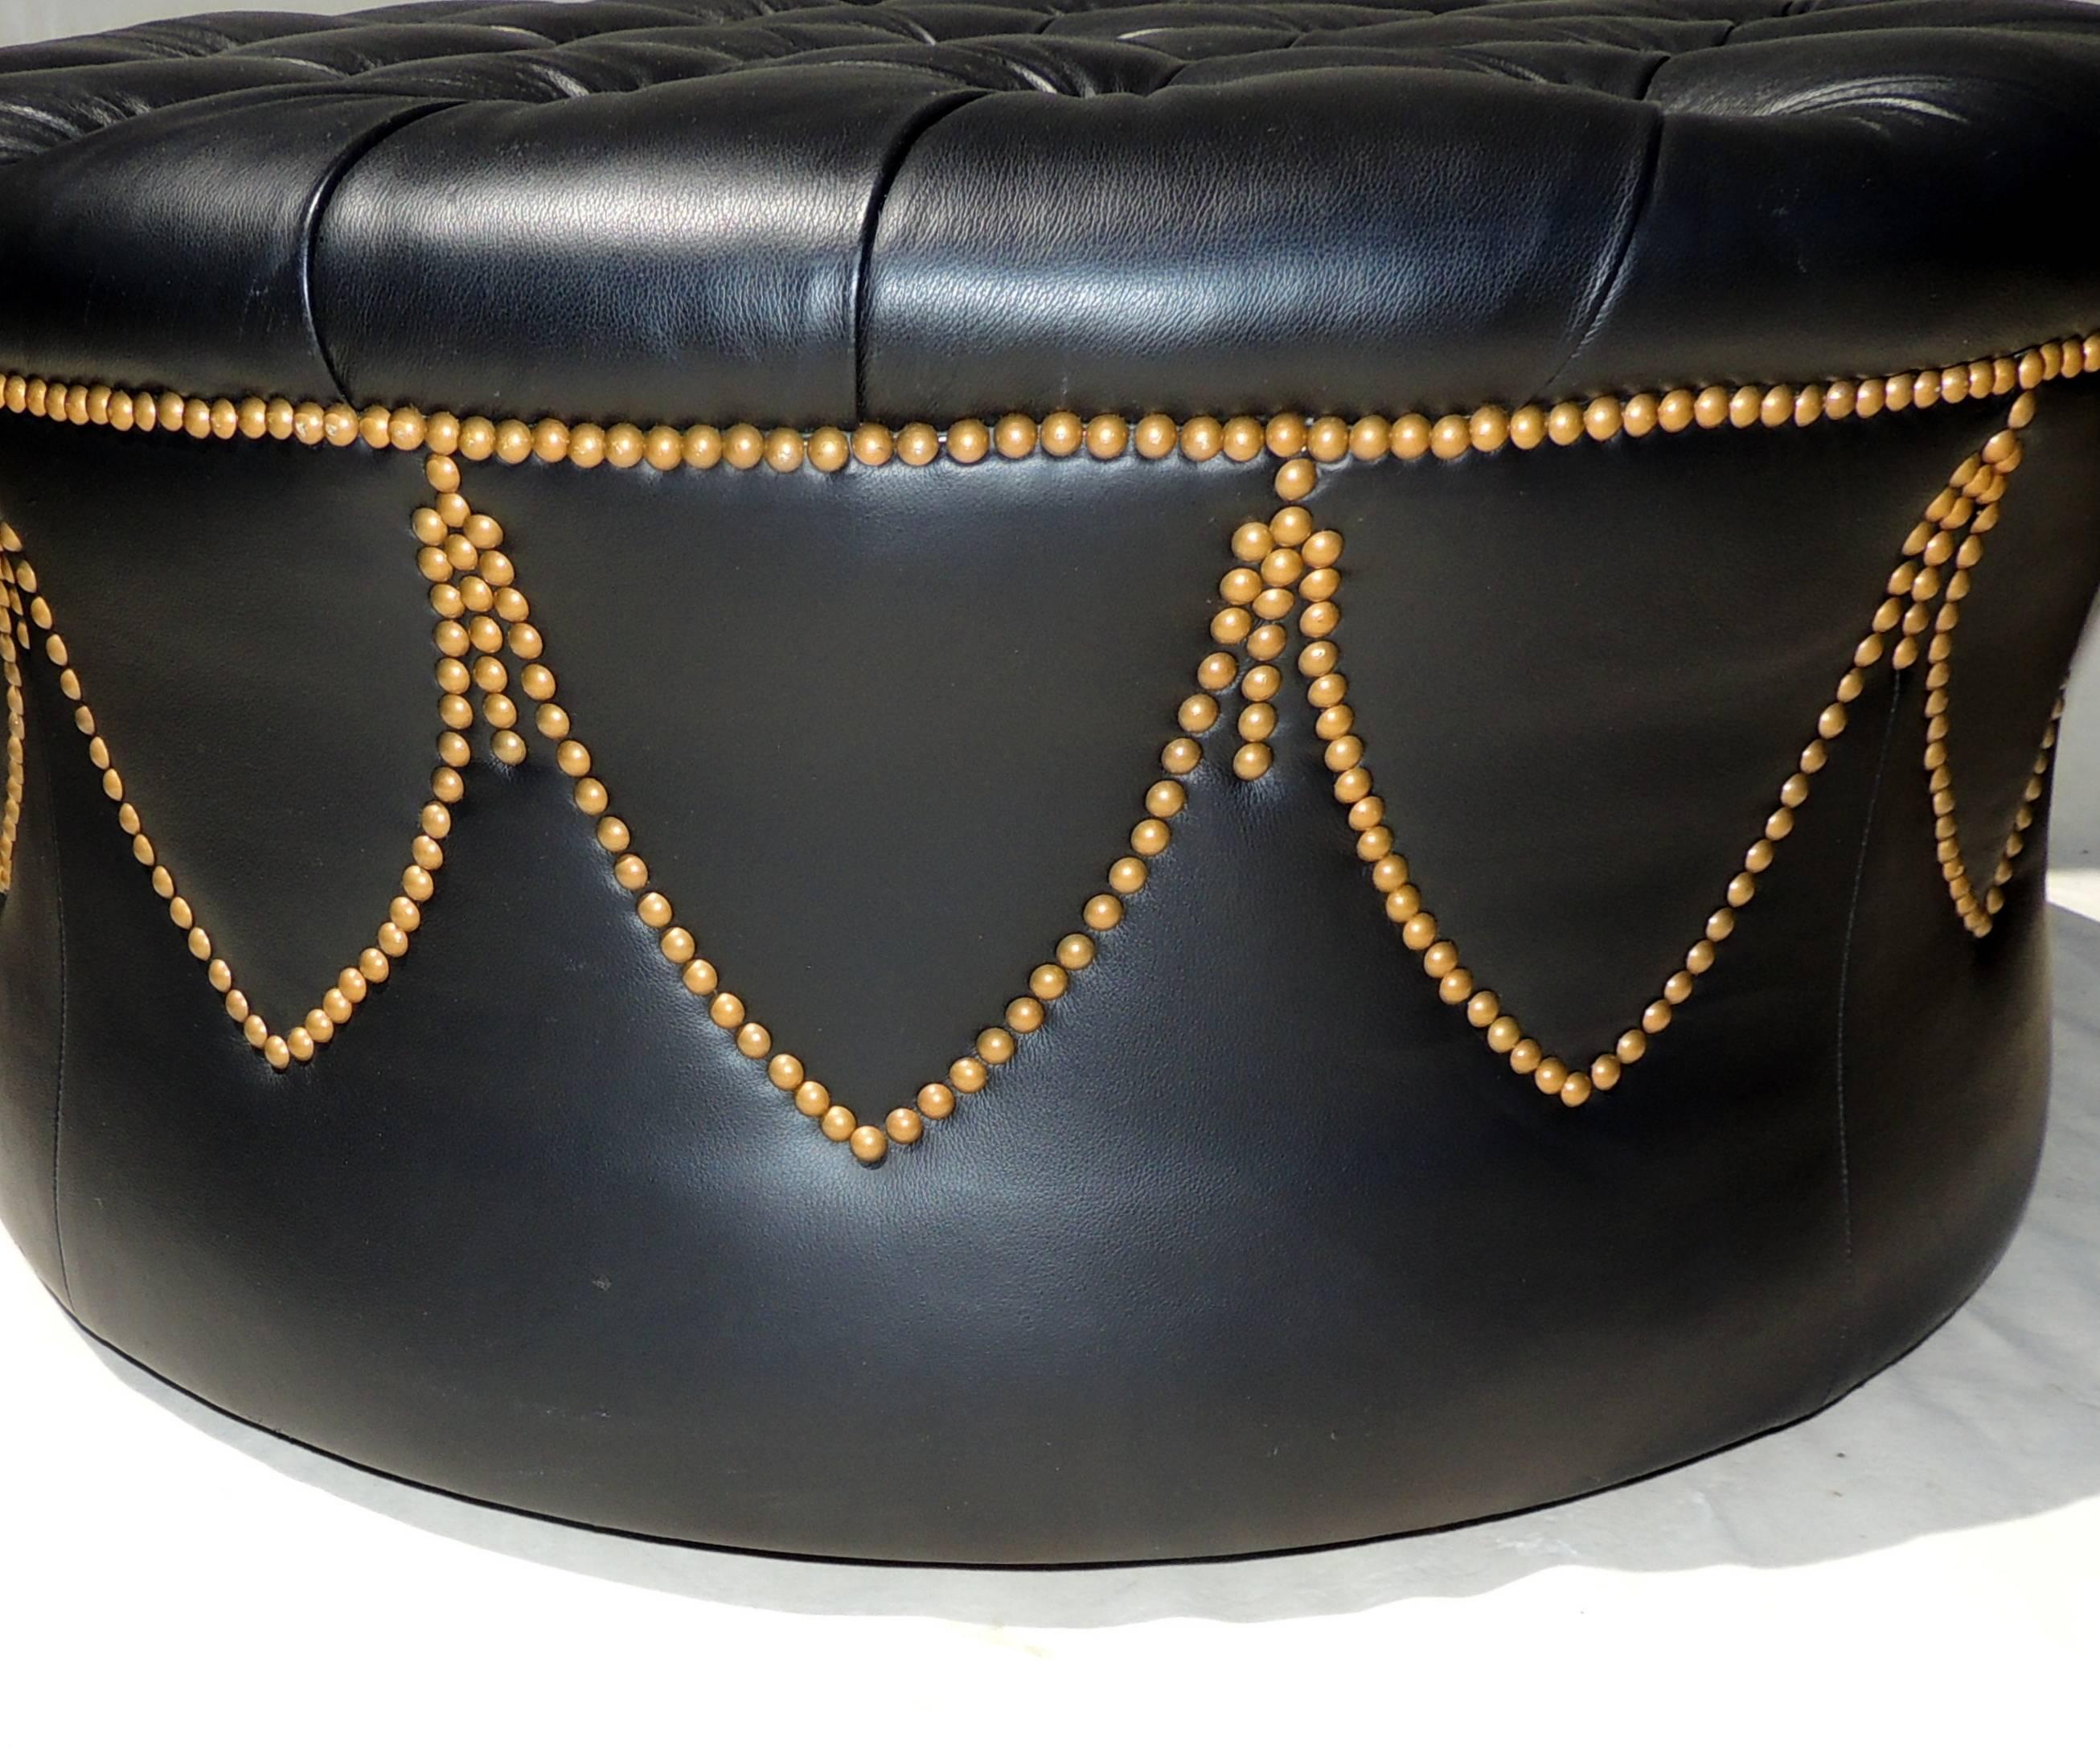 Handsome Black Leather Brass Nailhead Tufted Pouf Ottoman Round Bench Foot Rest 1